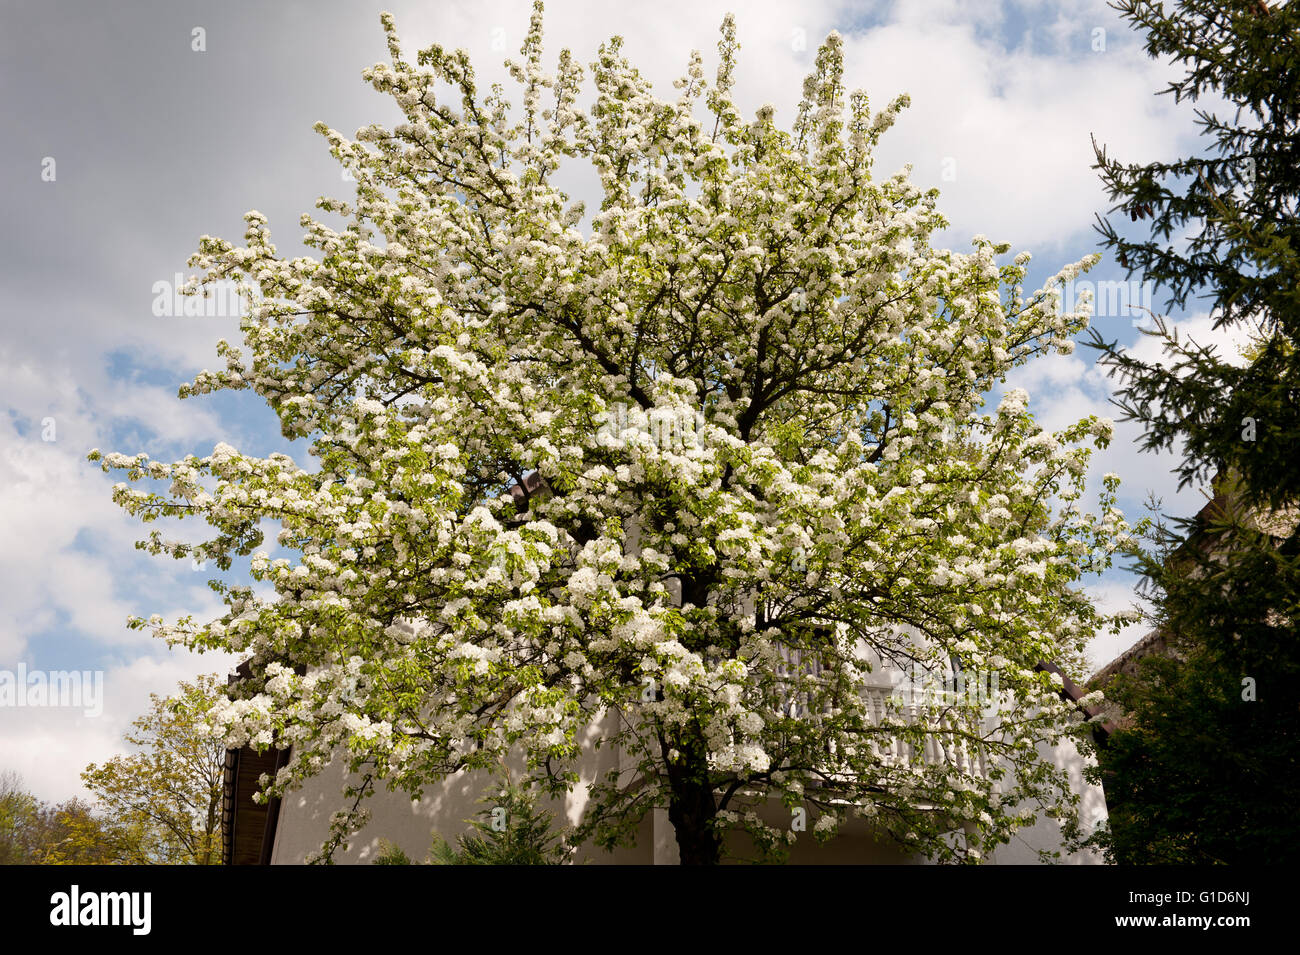 Apple tree white blooming curtain in front of the house, Malus flowering in spring season in Poland, Europe, plenty flowers. Stock Photo